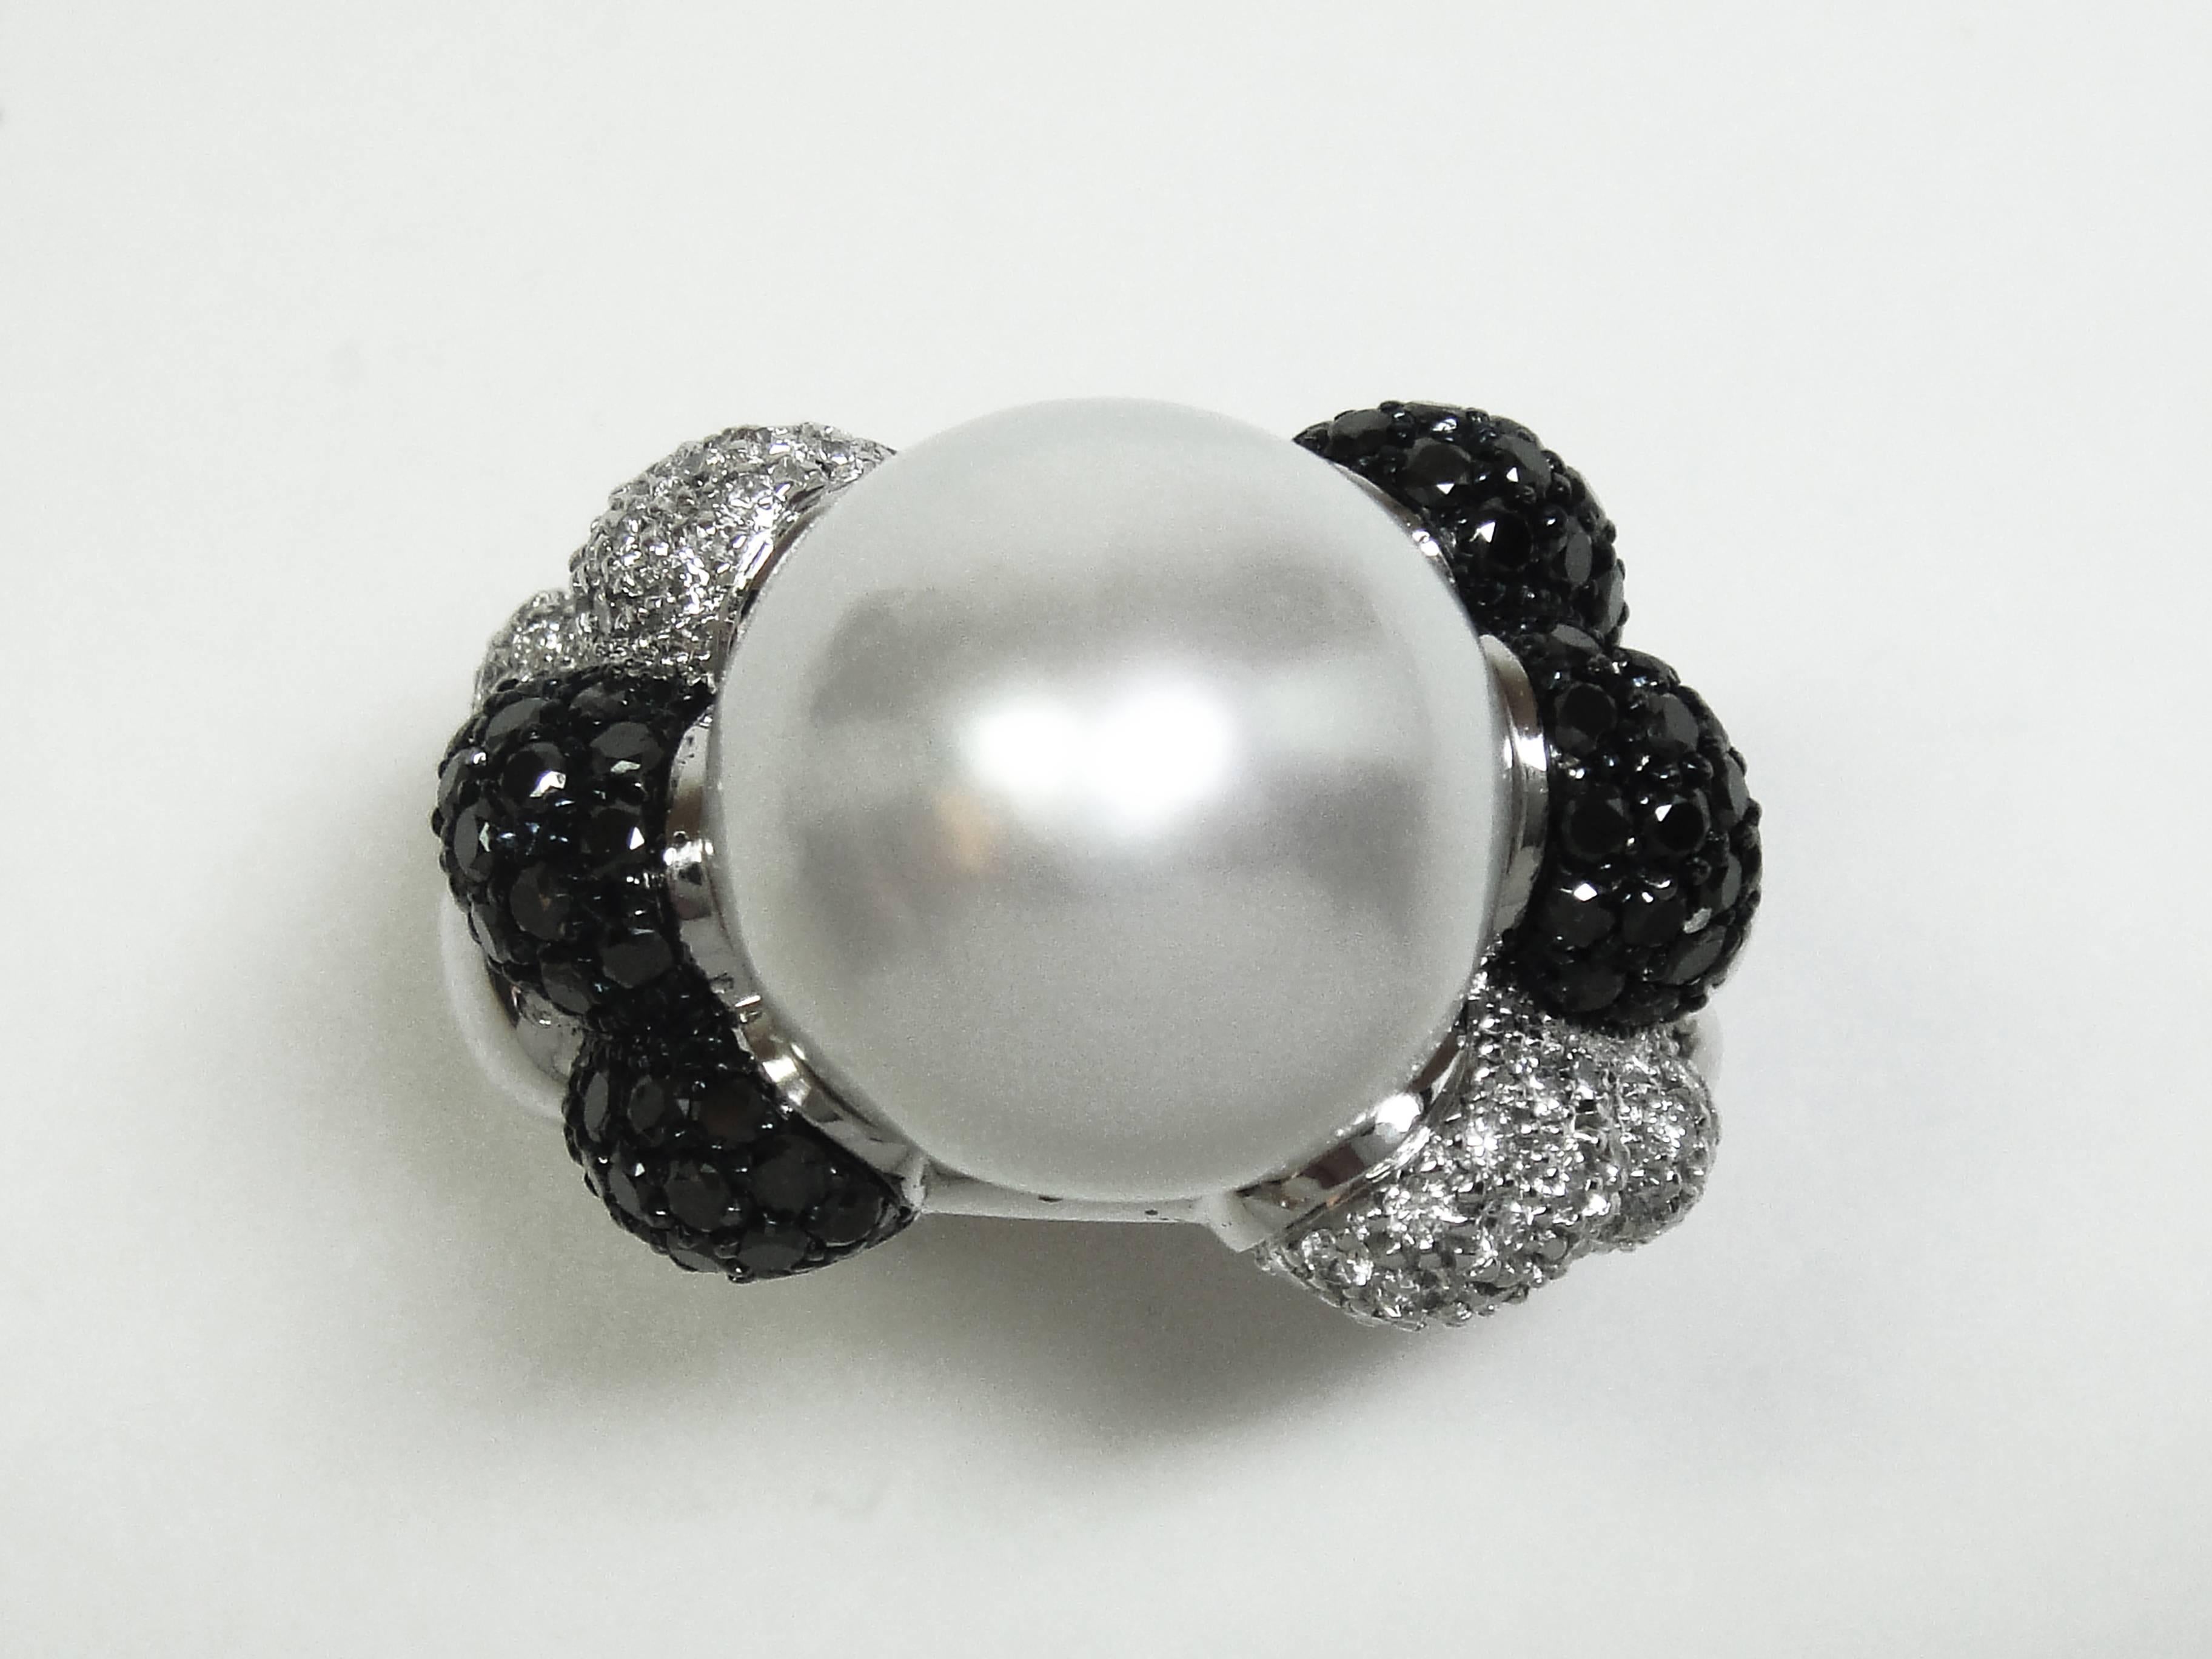 This cocktail ring is handcrafted in white 19.2K gold with a beautiful South Sea Cultured Pearl and set with black and white diamonds. This piece is designed by Monseo and manufactured by Monseo artisans in Porto, Portugal.

This piece is parte of